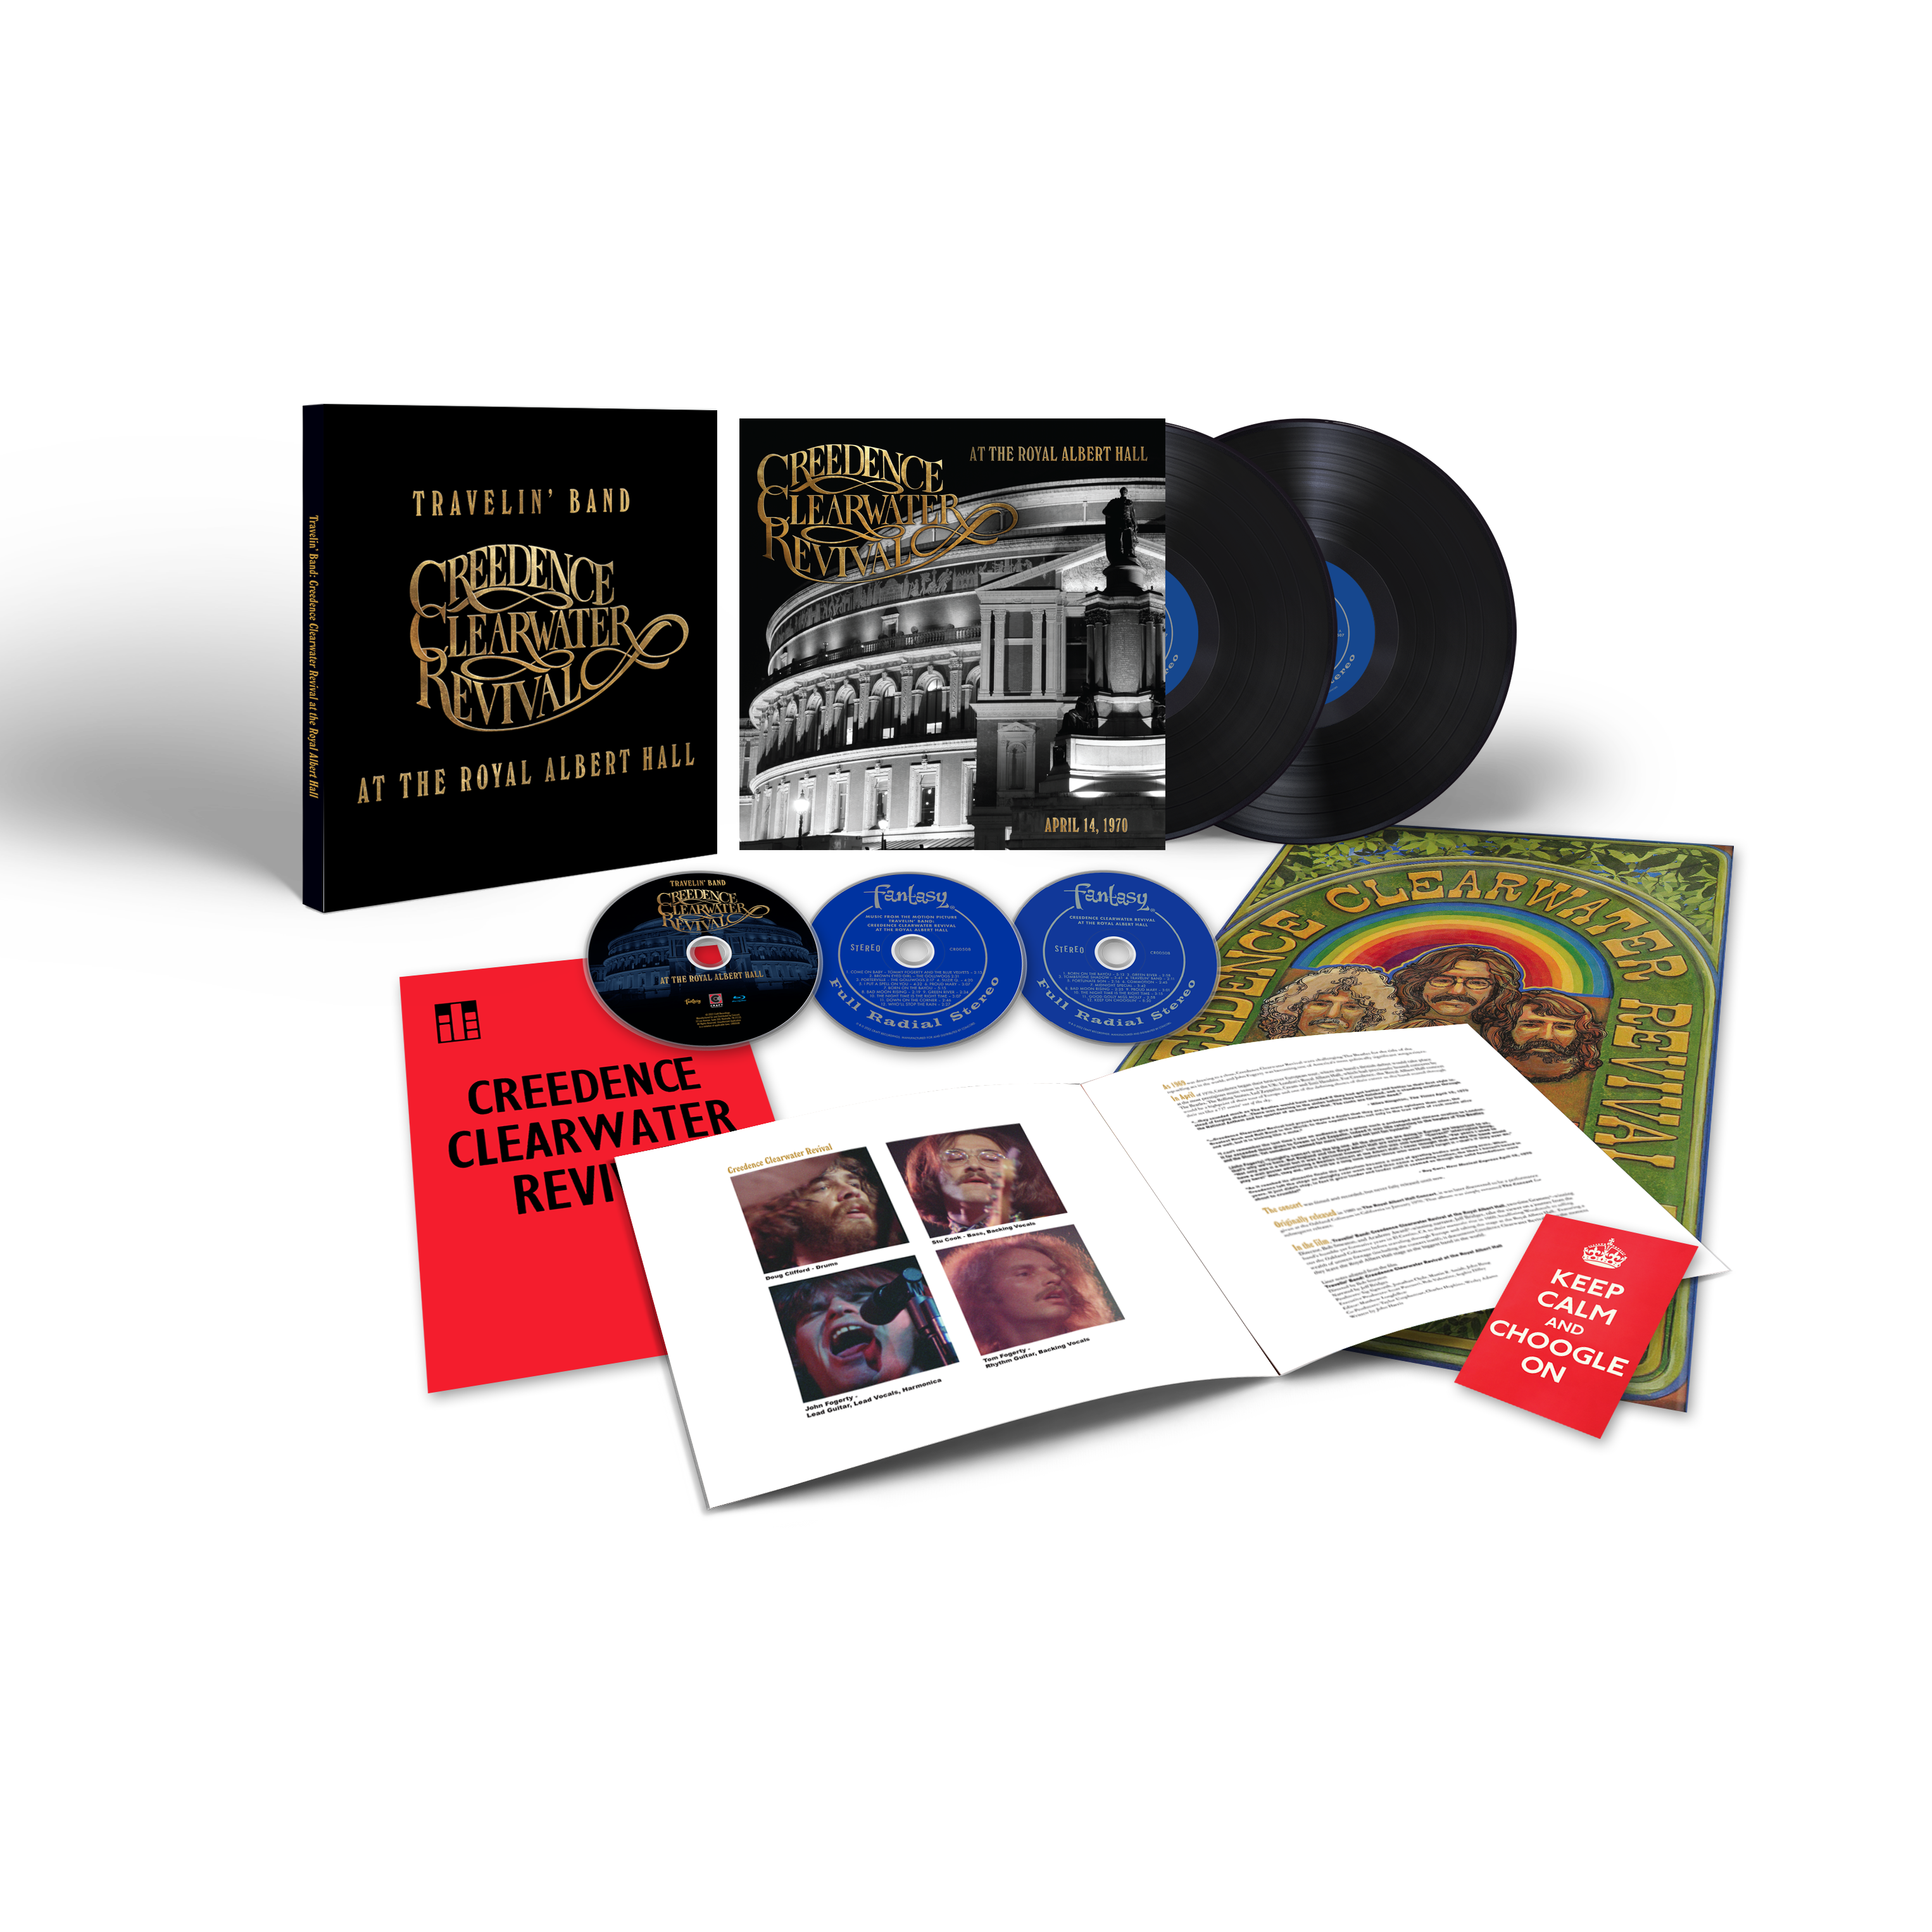 Travelin' Band: Creedence Clearwater Revival At The Royal Albert Hall  (Super Deluxe Edition Box Set, including Film)